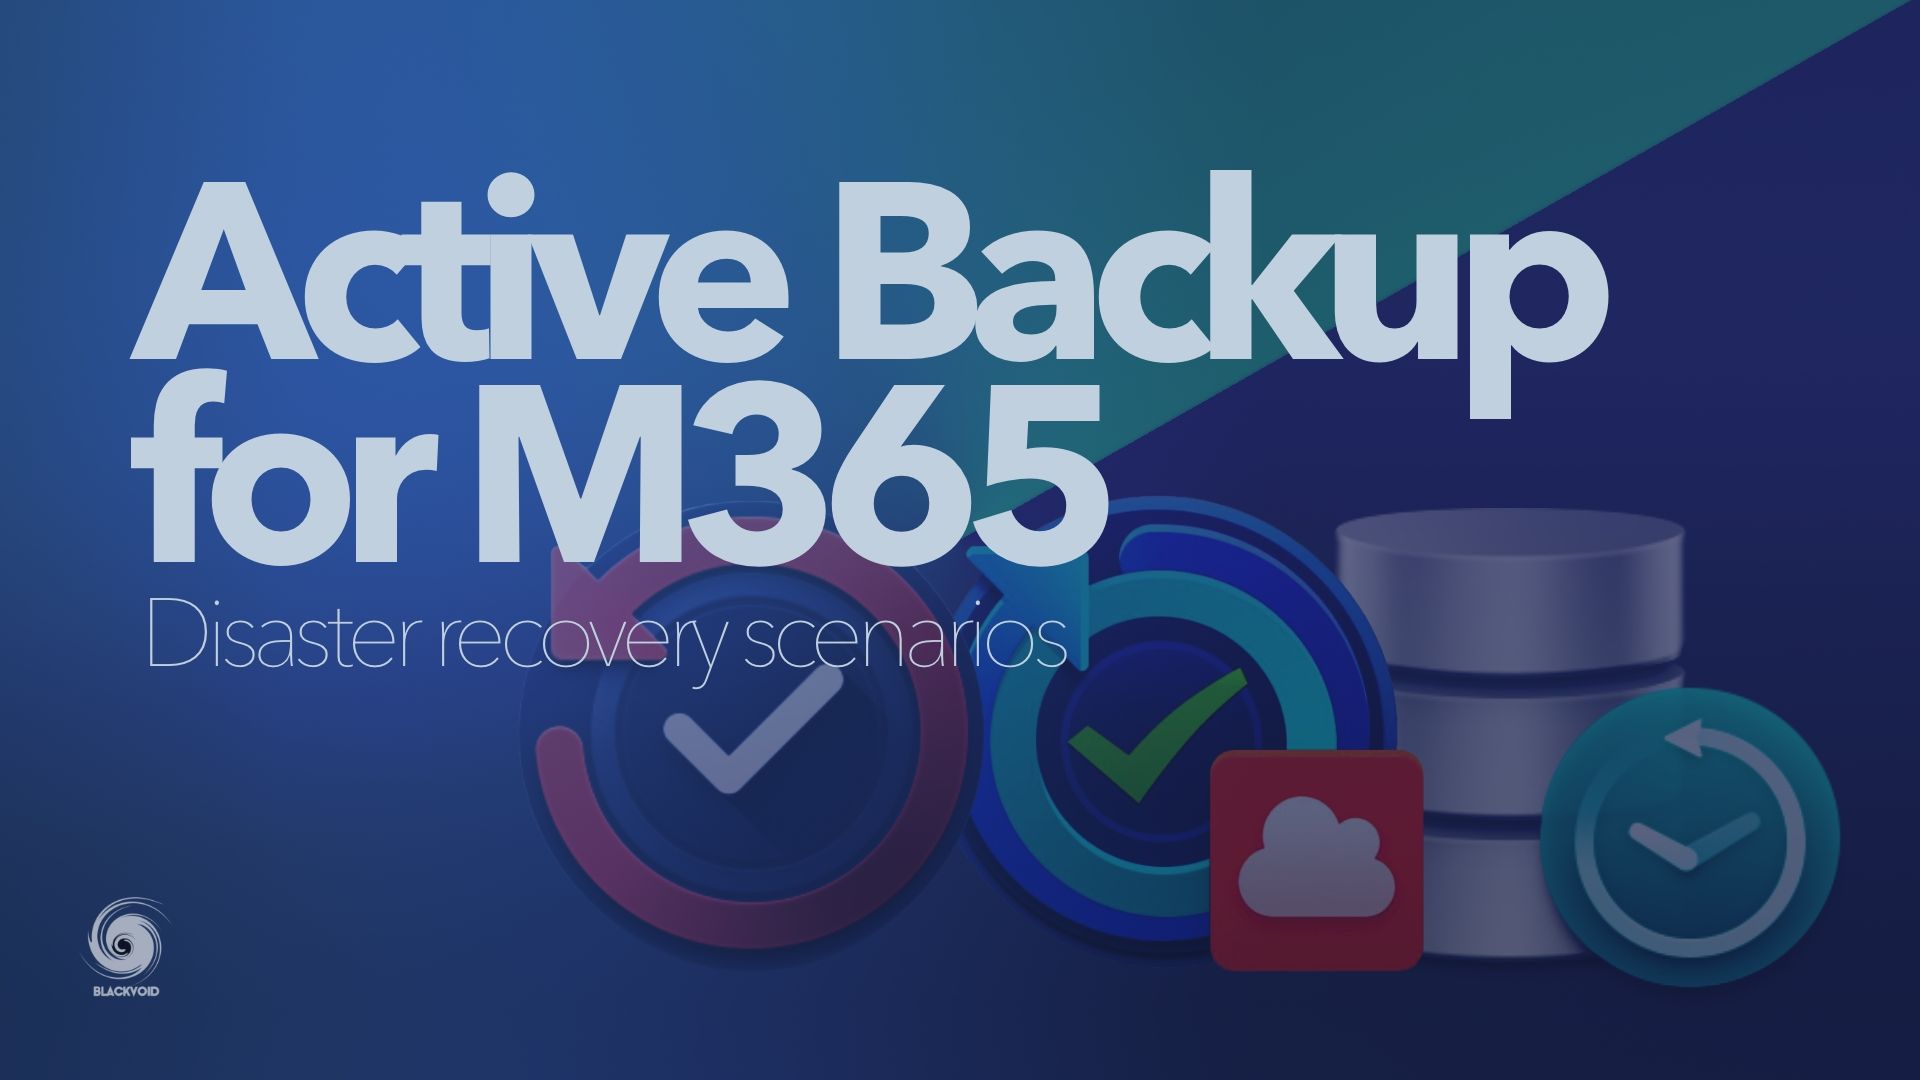 Active Backup for Microsoft 365 and DR scenarios